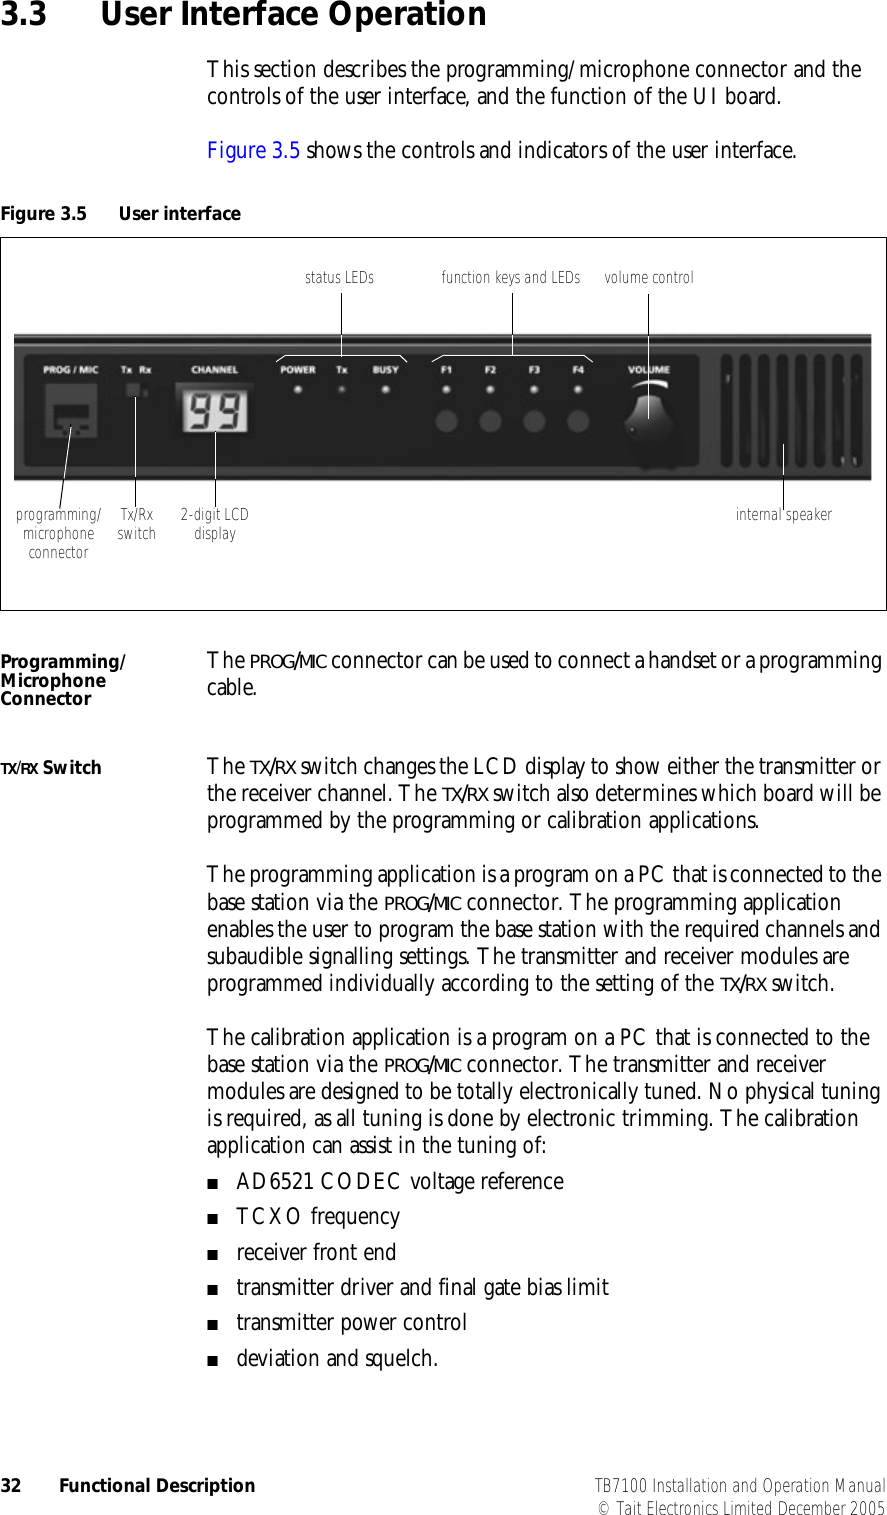  32 Functional Description TB7100 Installation and Operation Manual© Tait Electronics Limited December 20053.3 User Interface OperationThis section describes the programming/microphone connector and the controls of the user interface, and the function of the UI board.Figure 3.5 shows the controls and indicators of the user interface.Programming/Microphone ConnectorThe PROG/MIC connector can be used to connect a handset or a programming cable.TX/RX Switch The TX/RX switch changes the LCD display to show either the transmitter or the receiver channel. The TX/RX switch also determines which board will be programmed by the programming or calibration applications.The programming application is a program on a PC that is connected to the base station via the PROG/MIC connector. The programming application enables the user to program the base station with the required channels and subaudible signalling settings. The transmitter and receiver modules are programmed individually according to the setting of the TX/RX switch.The calibration application is a program on a PC that is connected to the base station via the PROG/MIC connector. The transmitter and receiver modules are designed to be totally electronically tuned. No physical tuning is required, as all tuning is done by electronic trimming. The calibration application can assist in the tuning of:■AD6521 CODEC voltage reference■TCXO frequency ■receiver front end■transmitter driver and final gate bias limit■transmitter power control■deviation and squelch.Figure 3.5 User interfacevolume controlfunction keys and LEDsinternal speakerstatus LEDs2-digit LCDdisplayTx/Rx switchprogramming/microphone connector